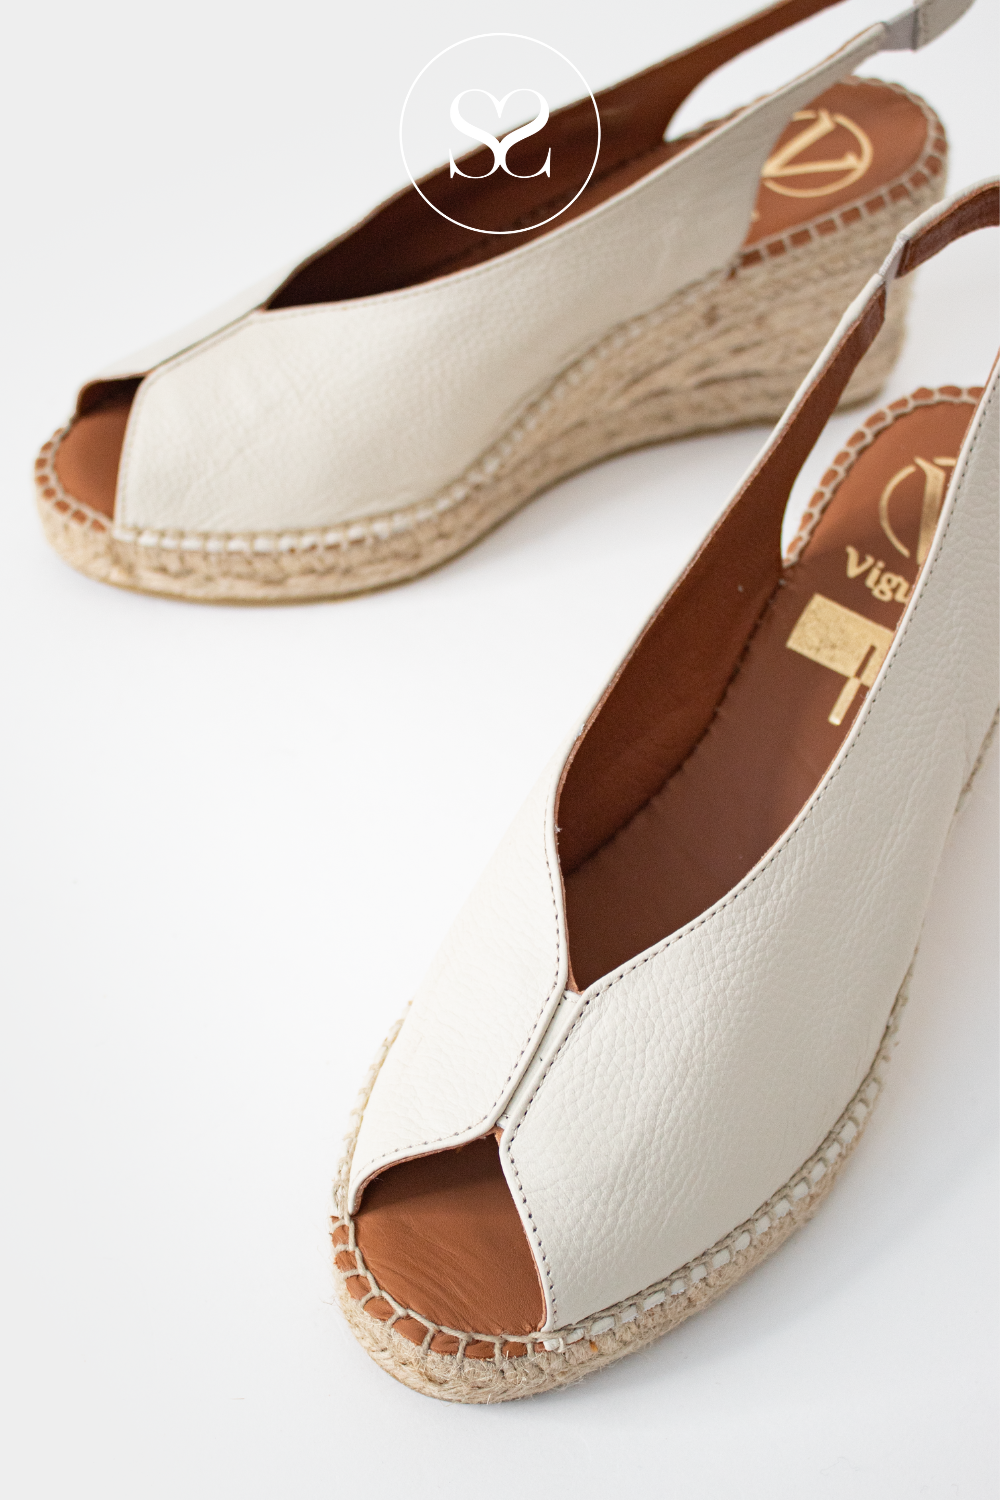 VIGUERA 2127 CREAM WEDGE ESPADRILLE SANDALS WITH PEEPTOE FRONT AND SLINGBACK HEEL